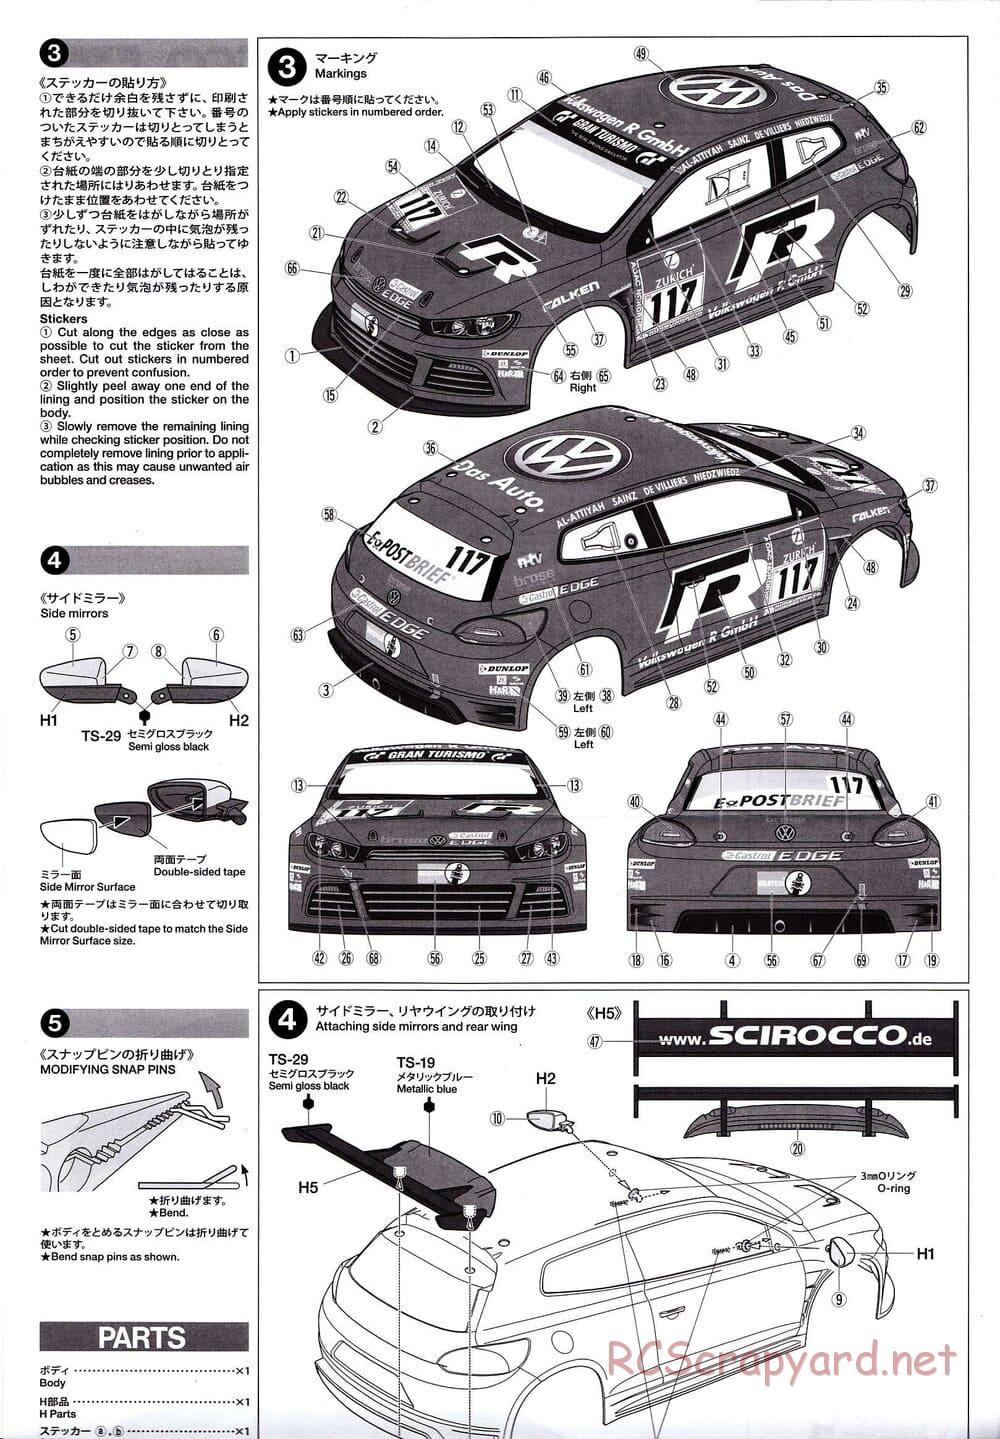 Tamiya - Volkswagen Scirocco GT24-CNG - FF-03 Chassis - Body Manual - Page 3